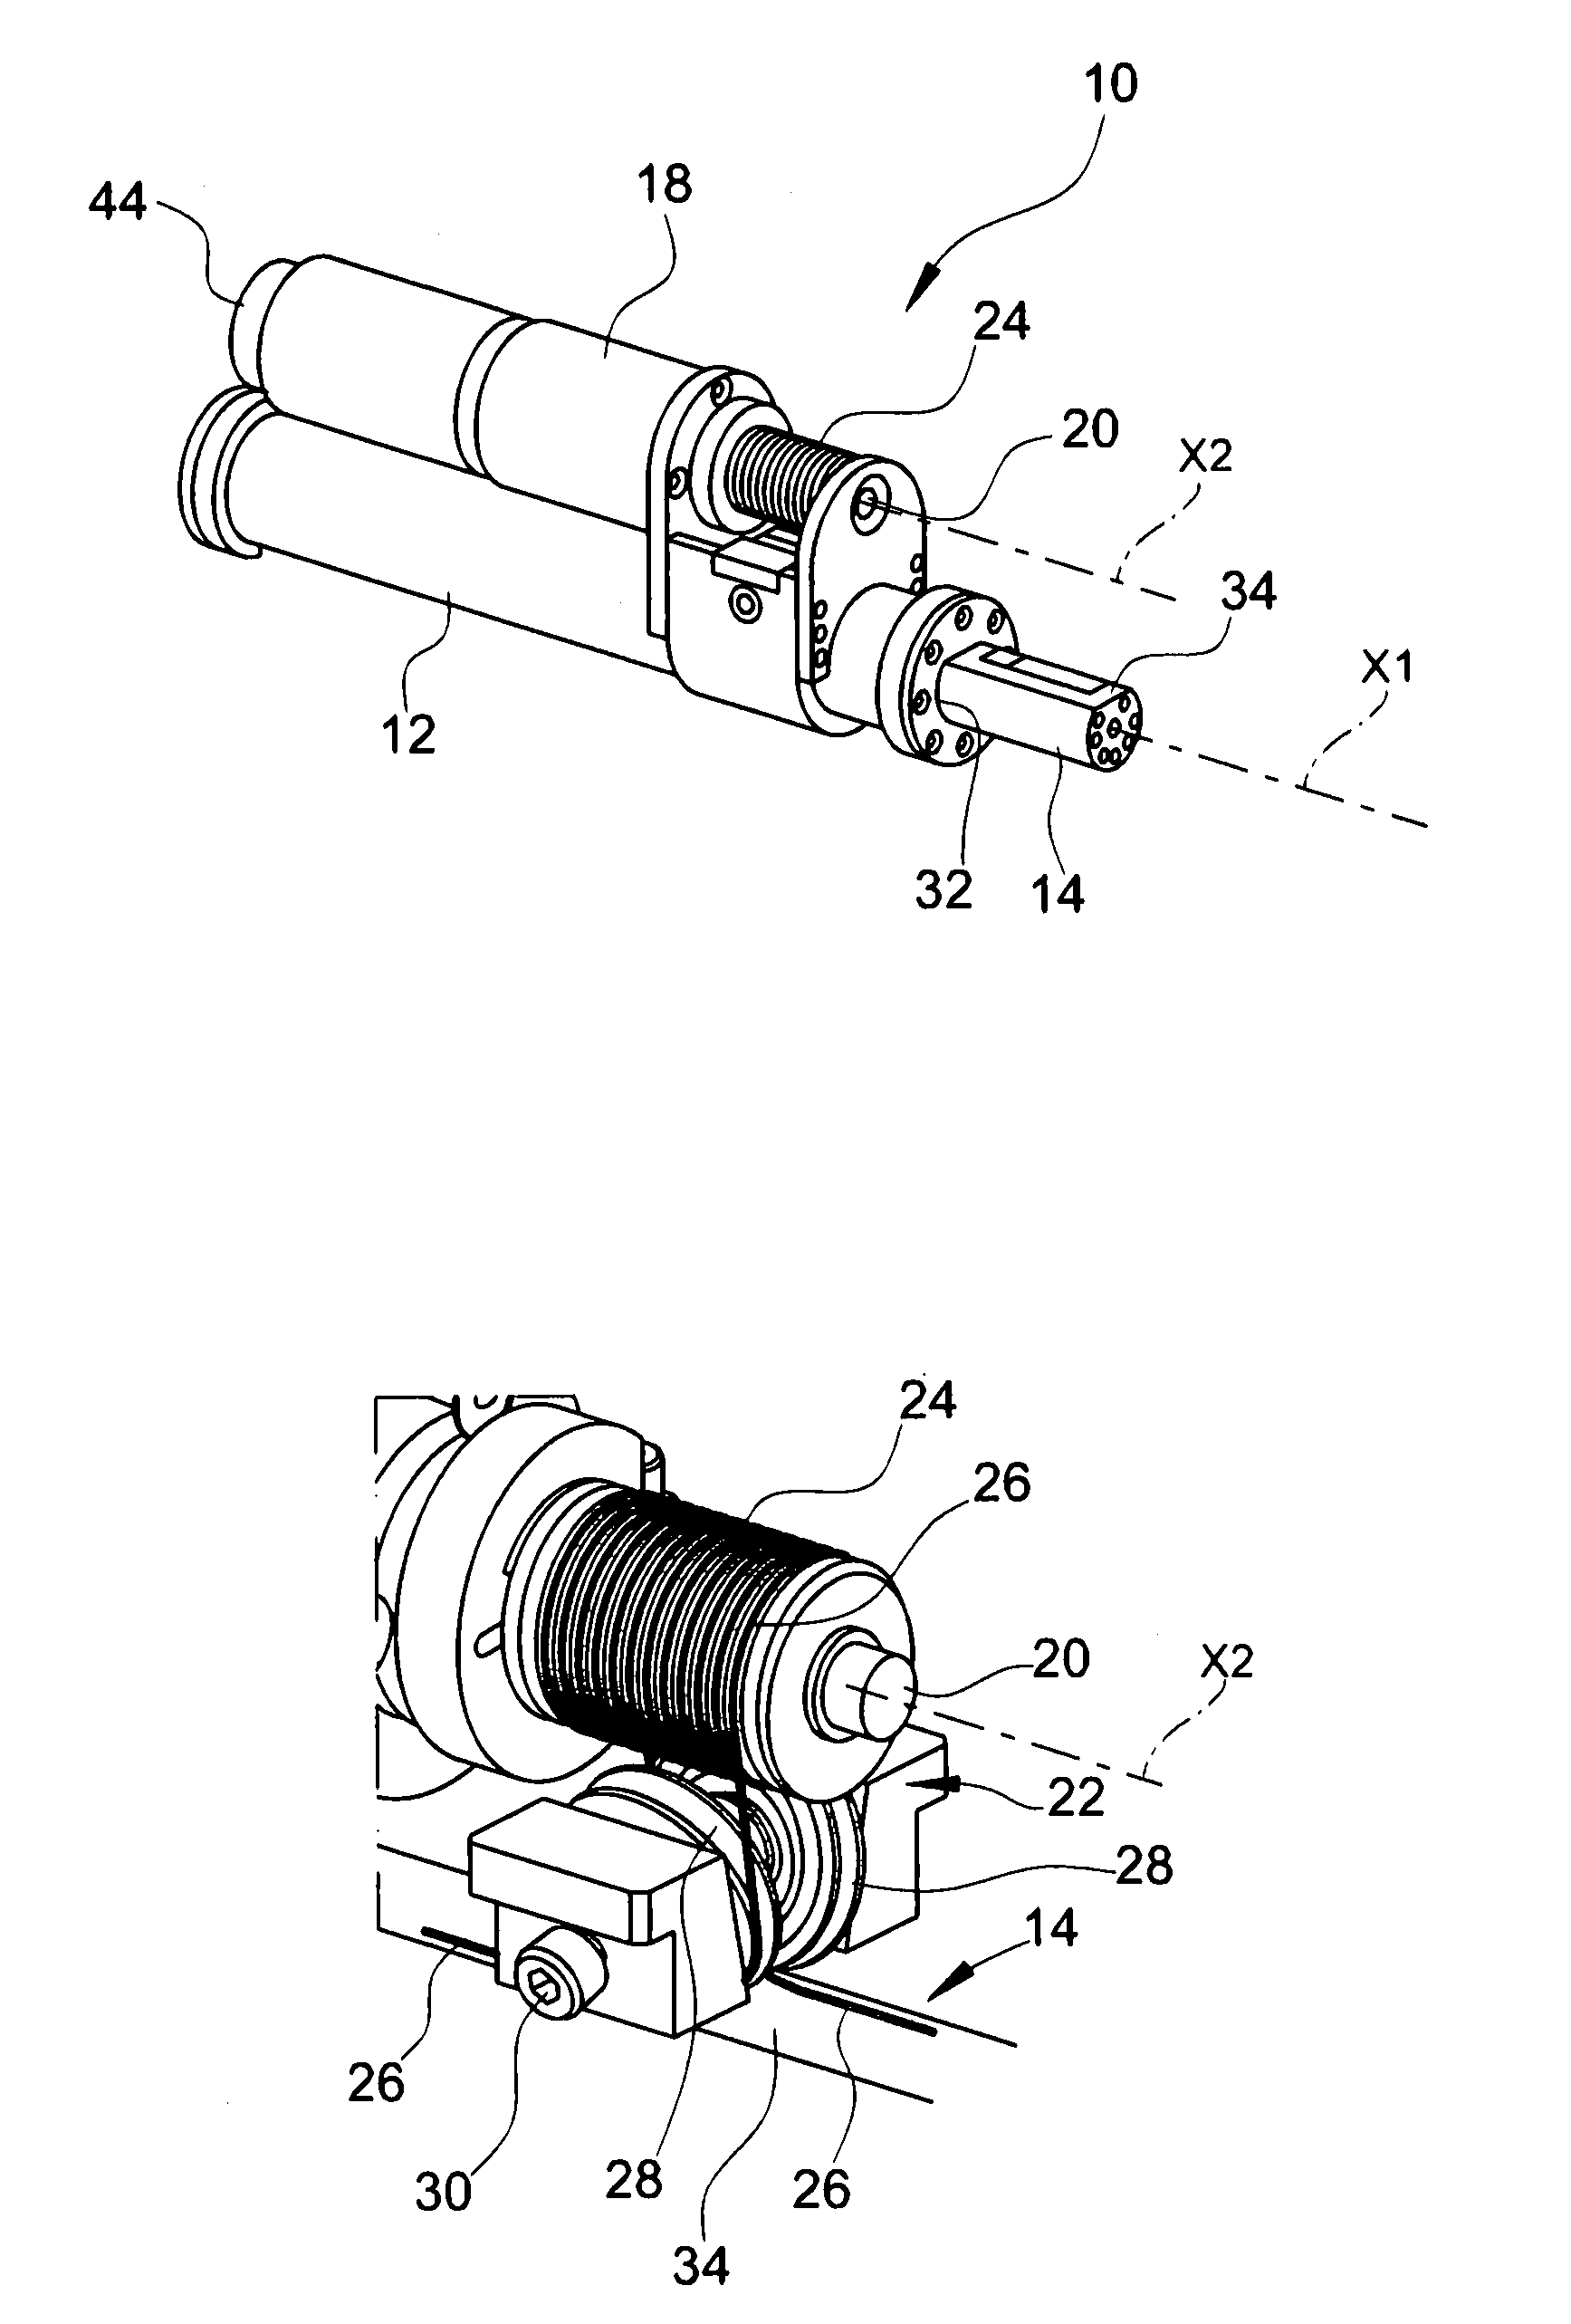 Linear actuator and rehabilitation device incorporating such an actuator